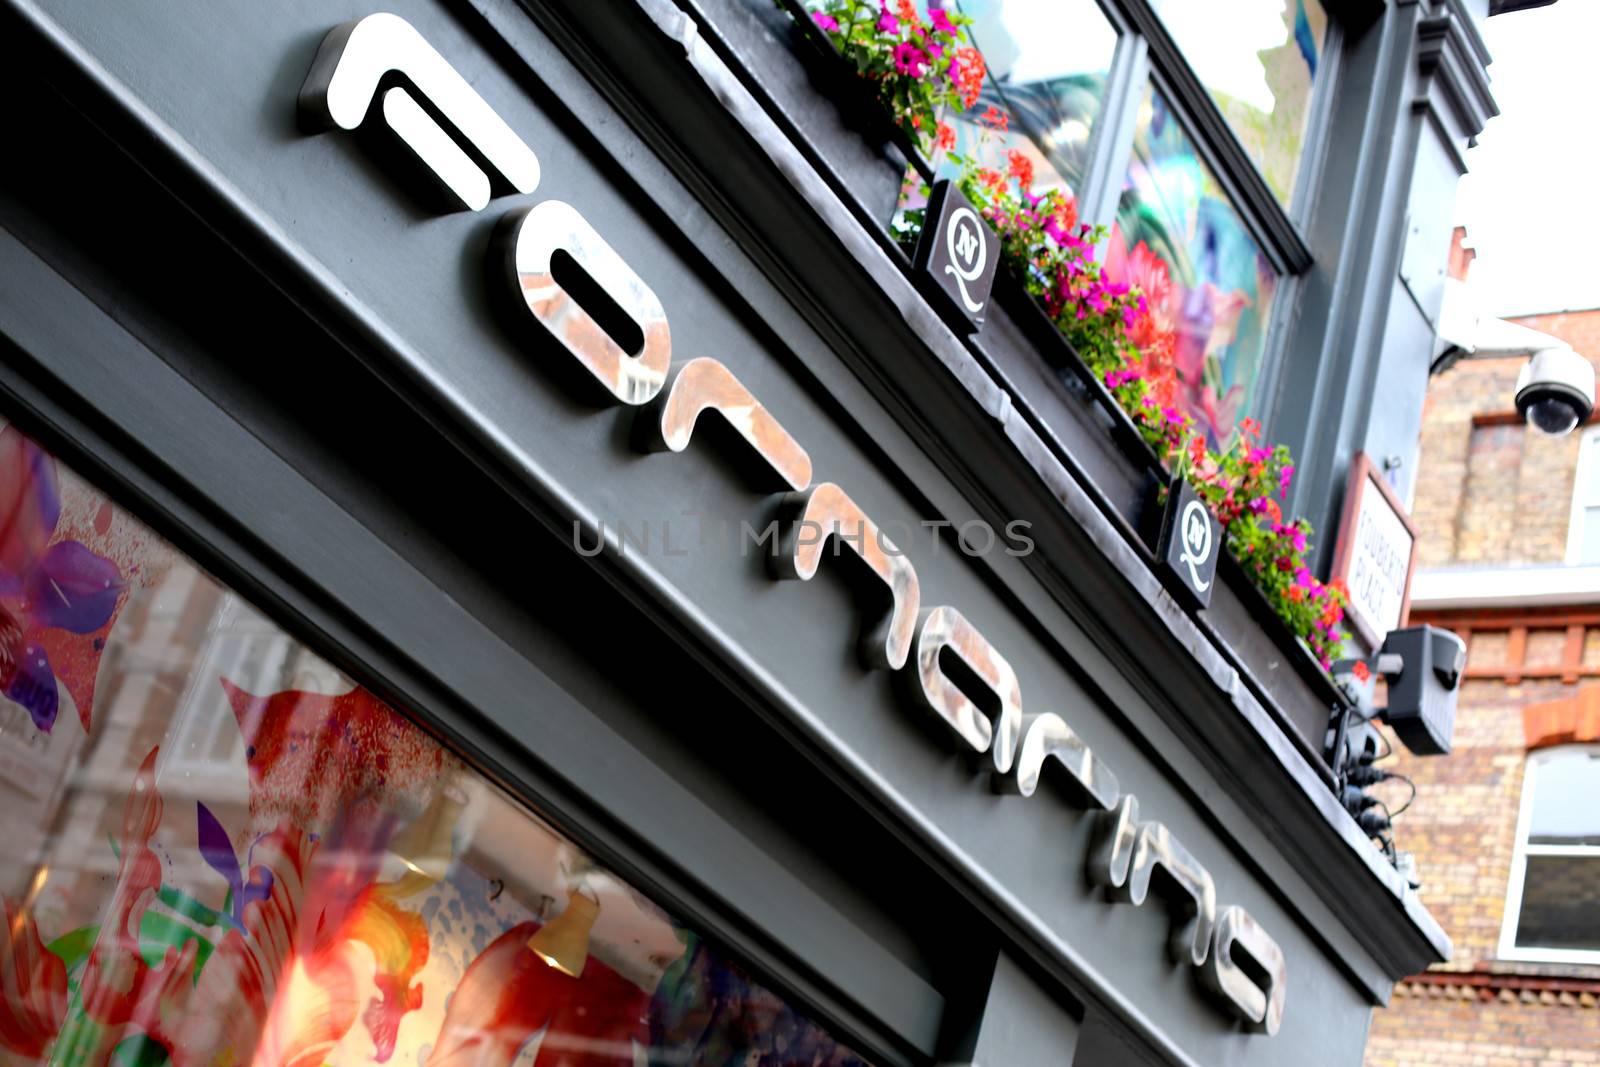 Fornarina Shop Sign Foubert's Place London by Whiteboxmedia